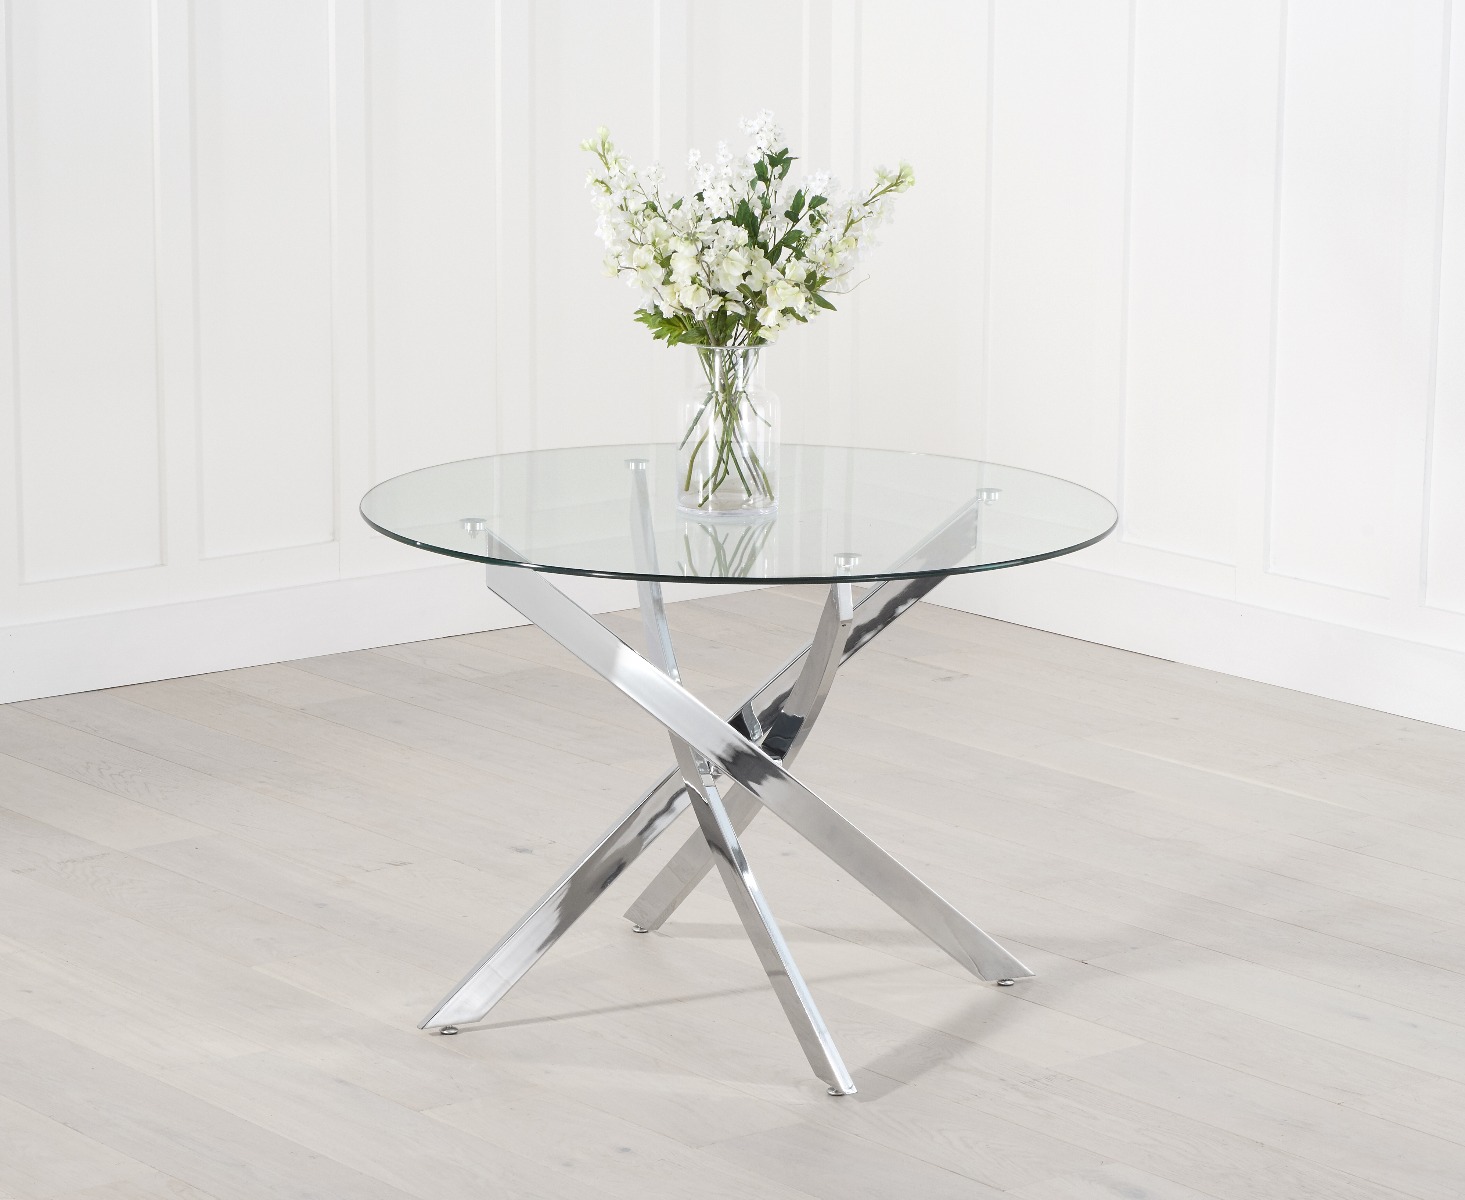 Photo 5 of Denver 120cm glass dining table with 4 white vigo chairs